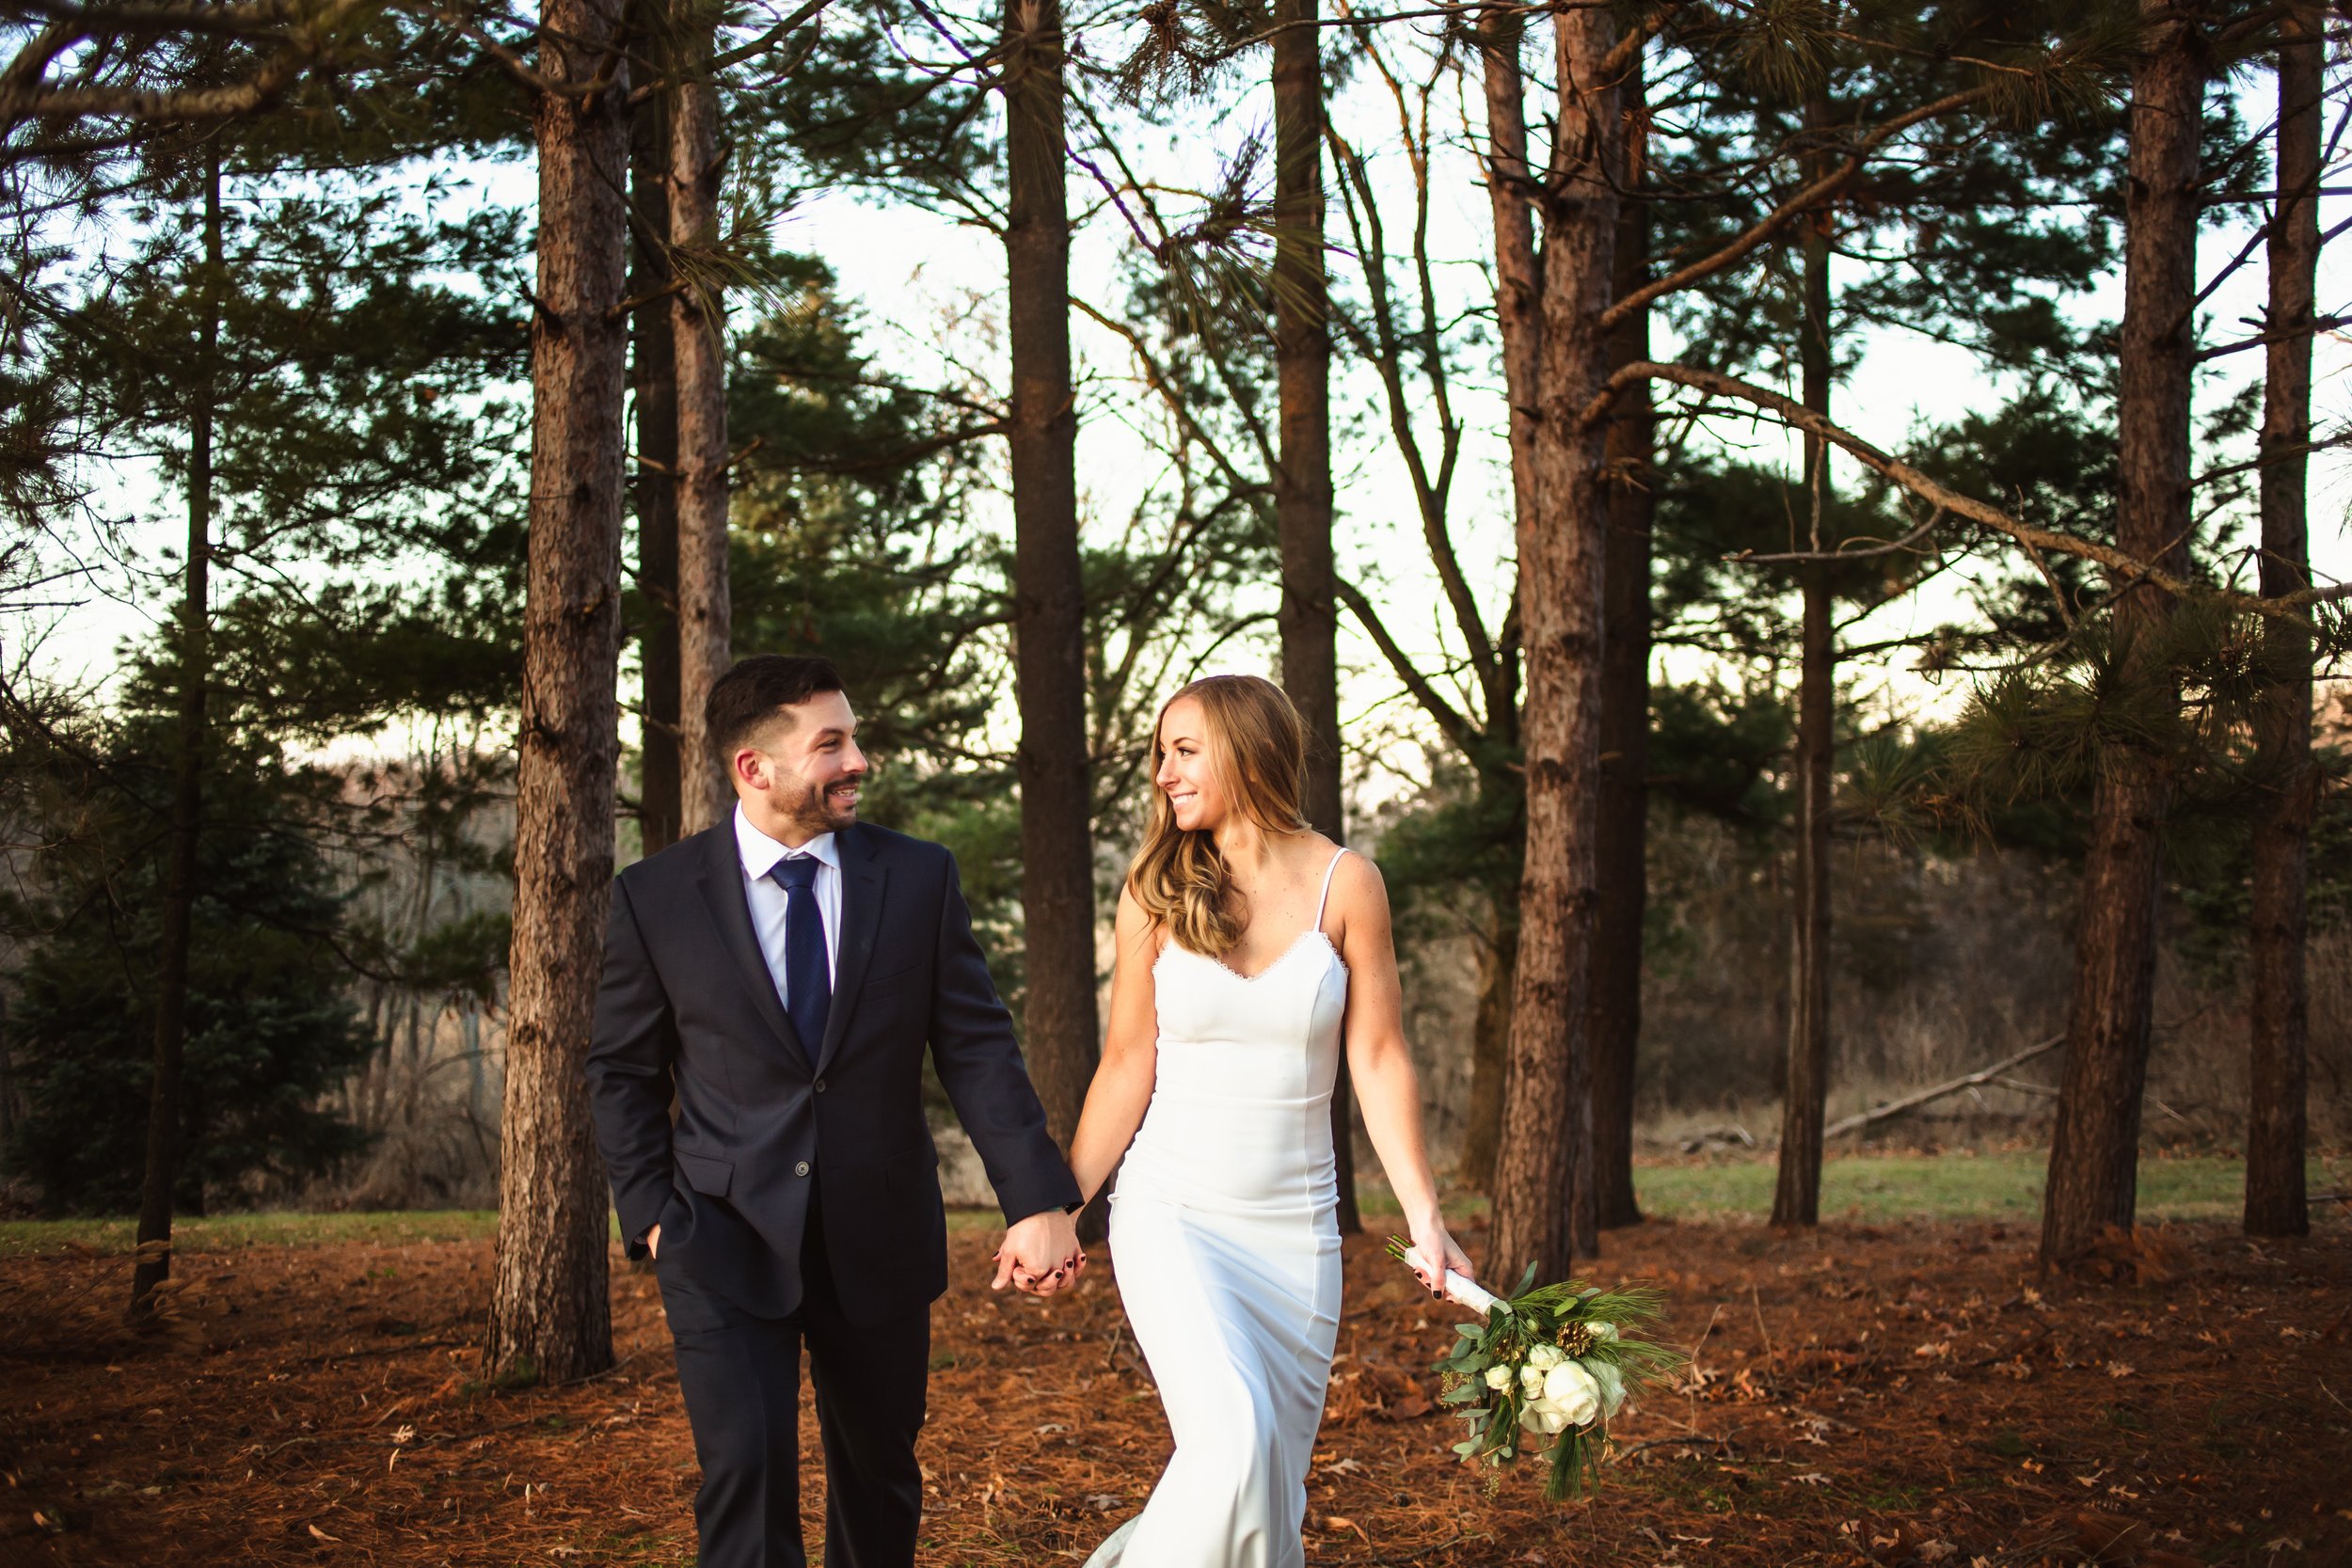  Newlyweds walk hand in hand through a wooden forest at dusk captured by Teala Ward Photography. bride and groom portraits Ironwood Illinois #tealawardphotography #tealawardweddings #LaSalleIllinois #IronwoodontheVermillion #weddingphotographyIL 